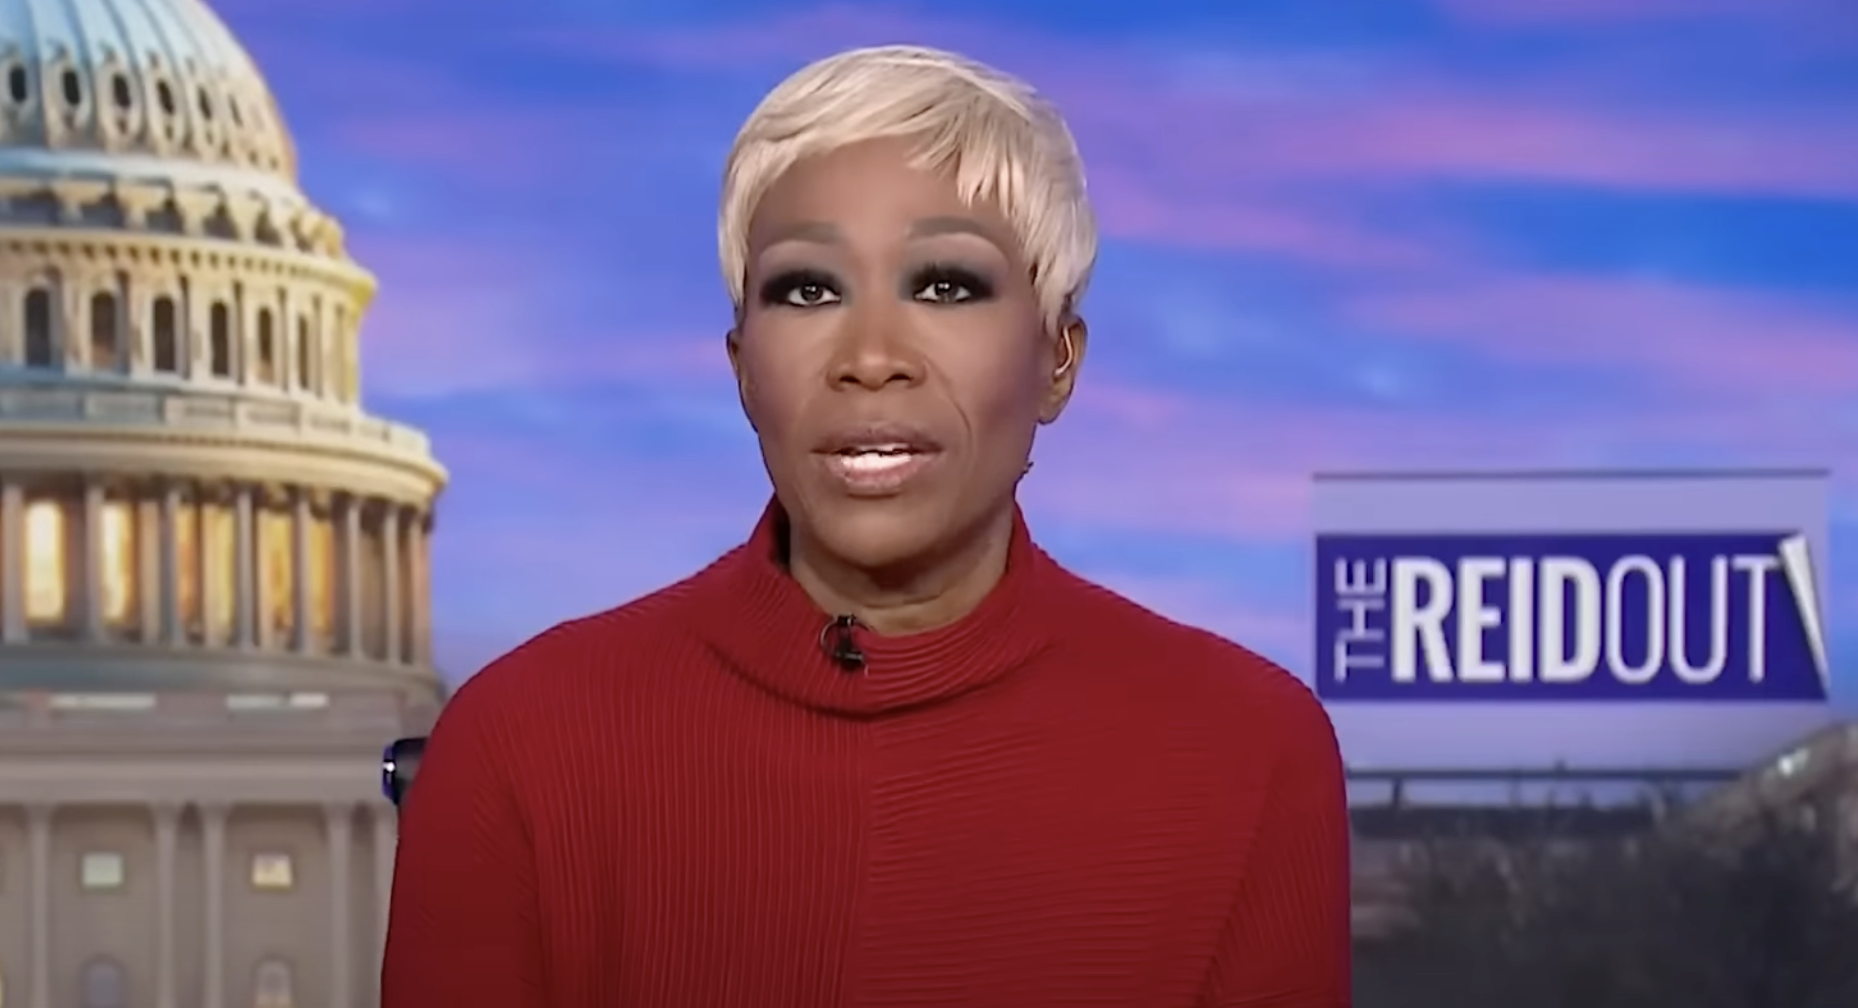 x-users-criticizing-joy-reid-for-“whining”-about-white-christians-for-their-political-stance 